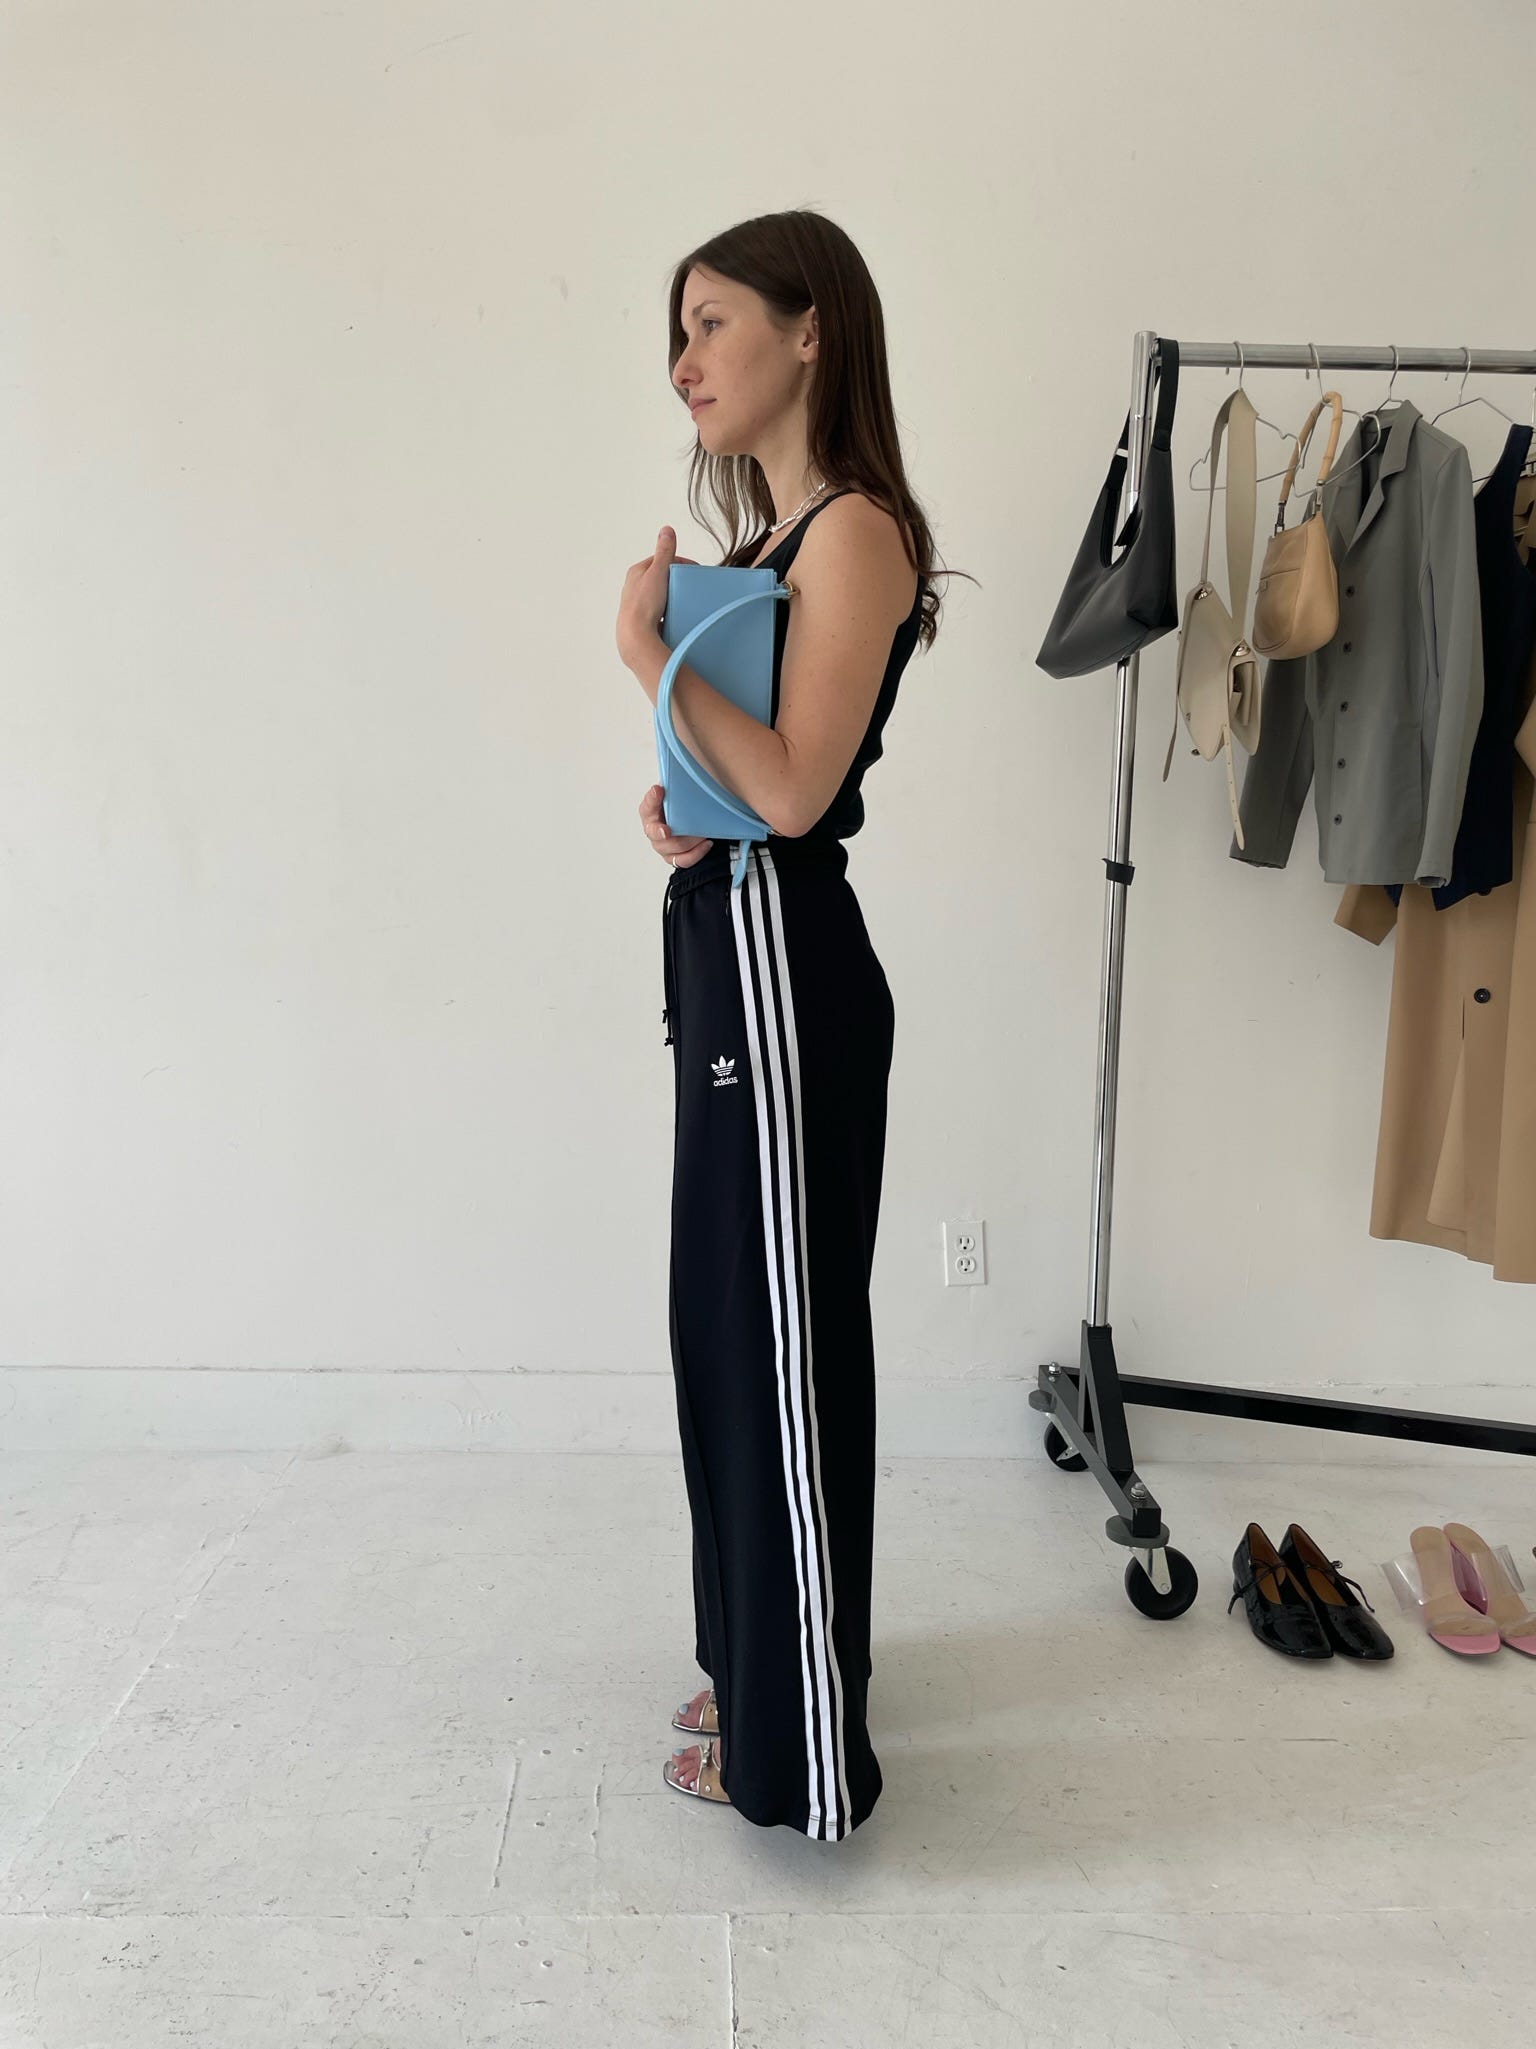 Athleisure Outfit Idea: Adidas Track Pants